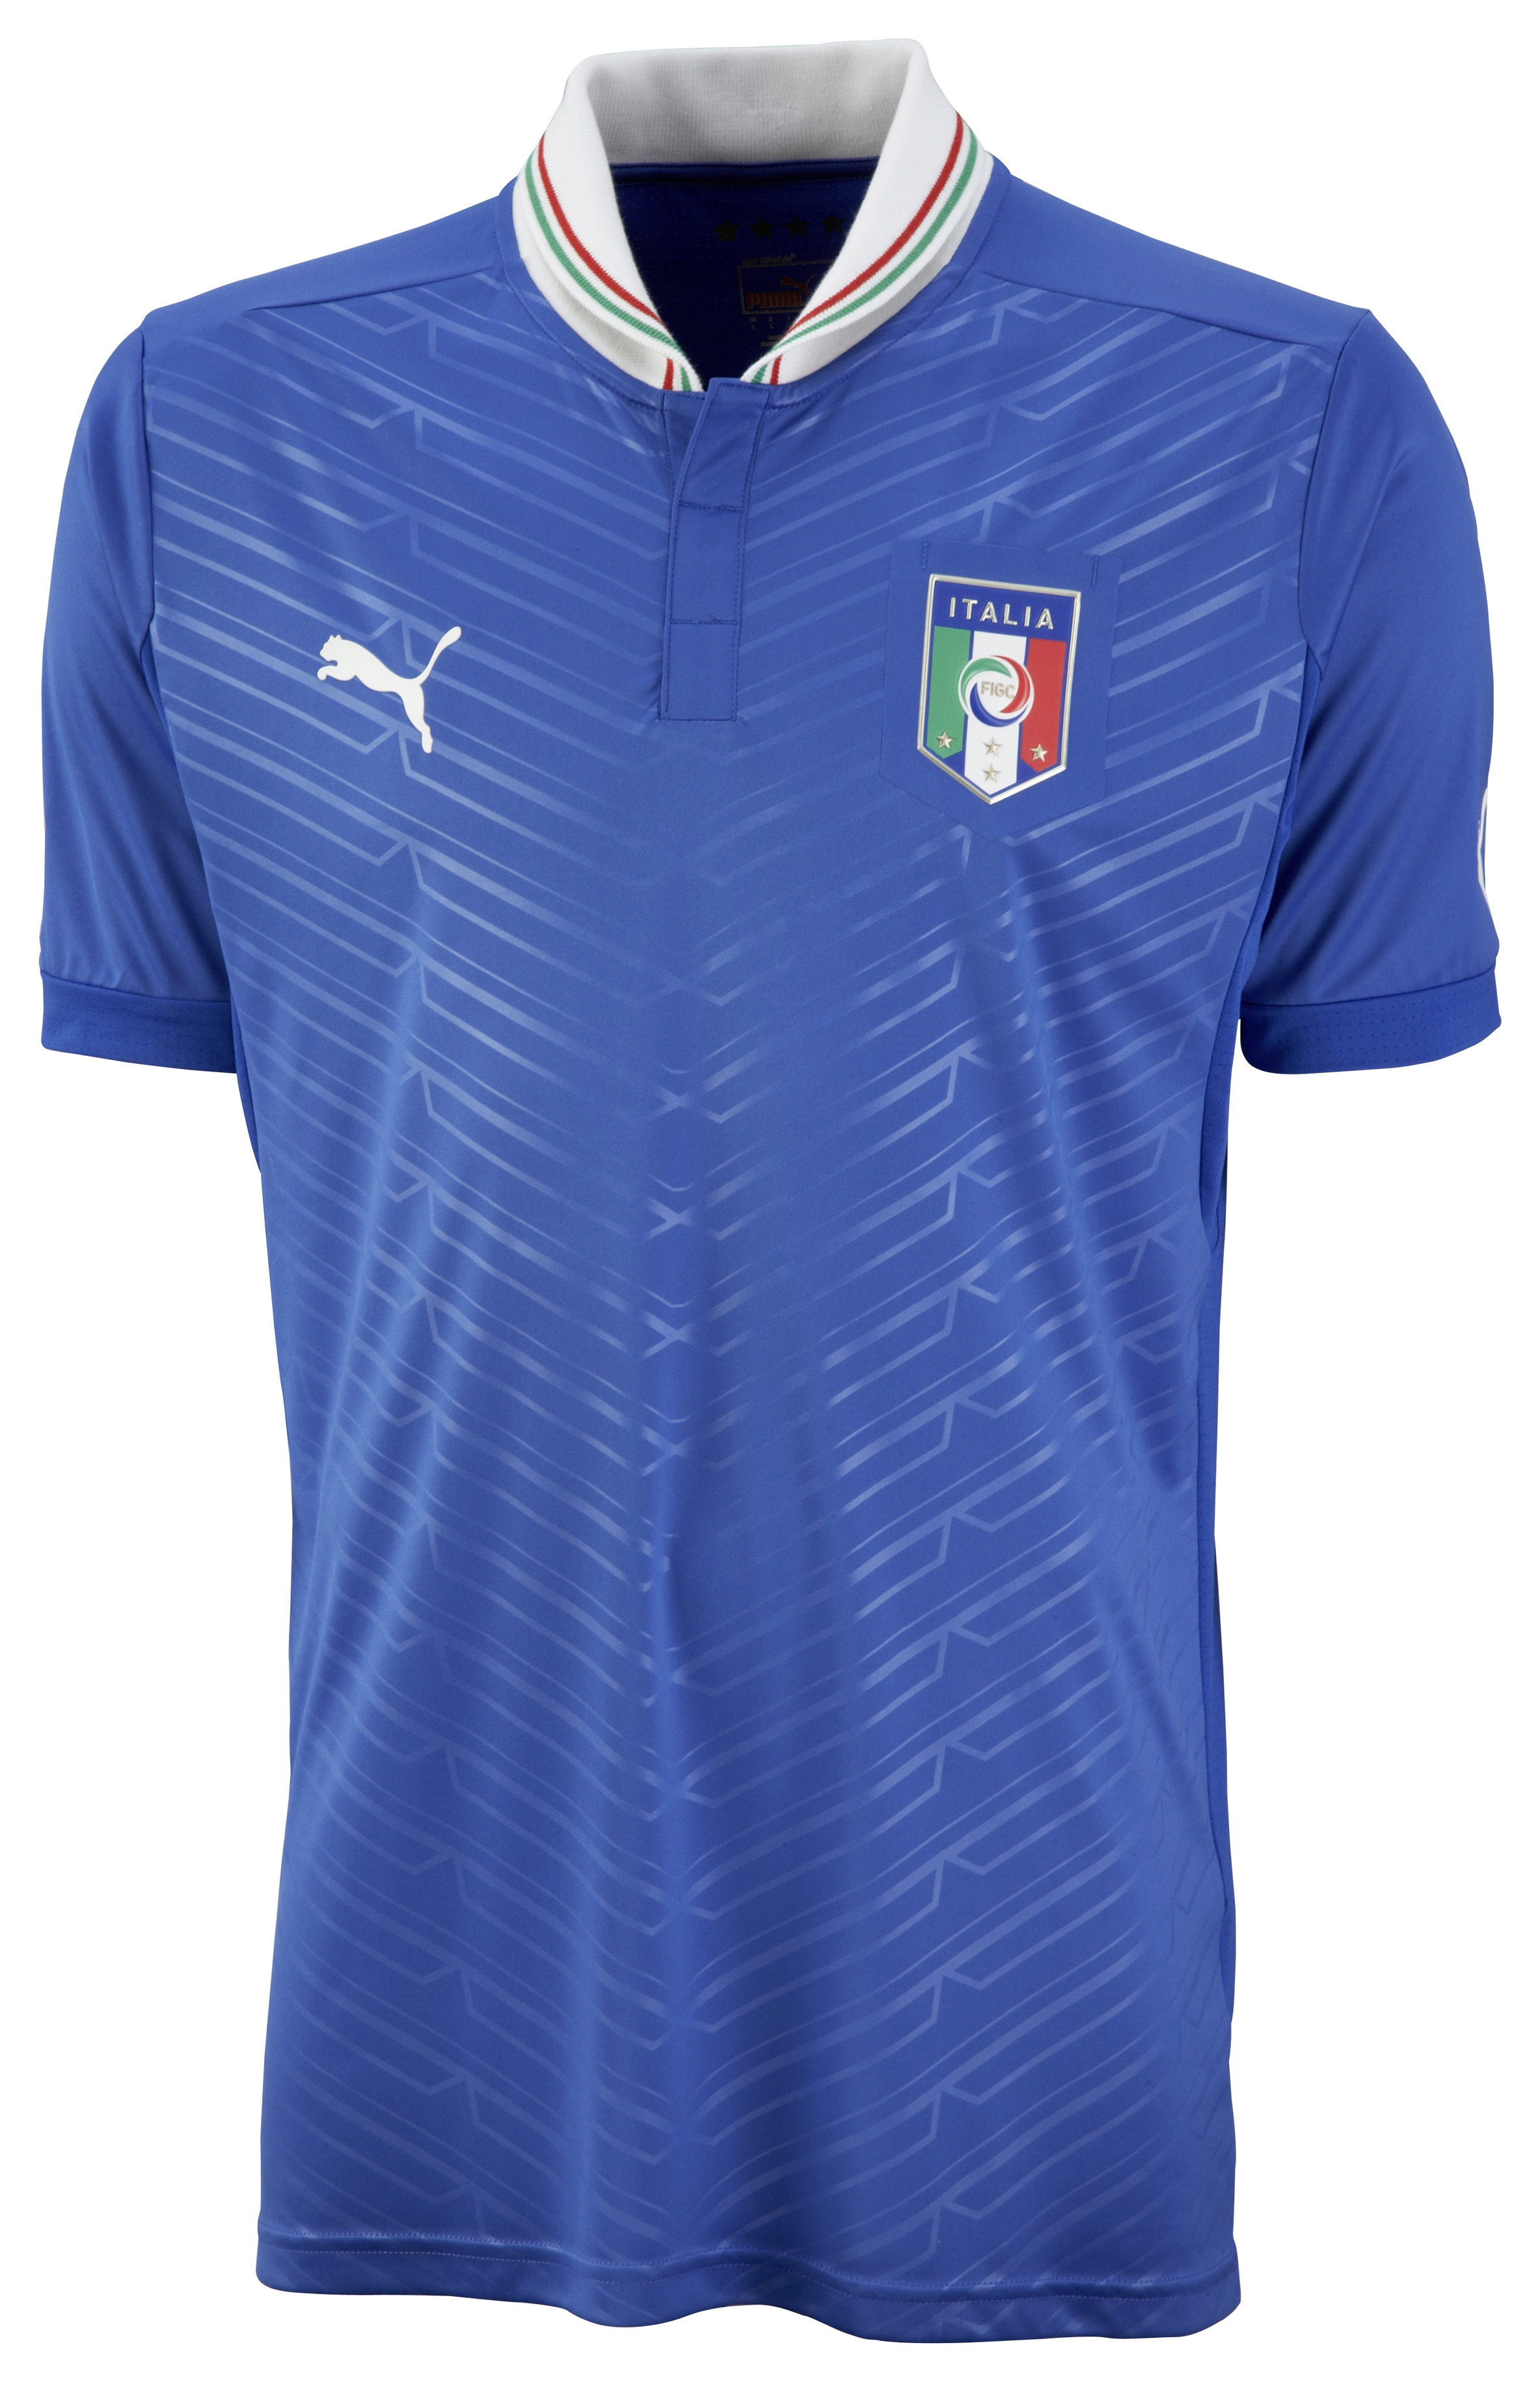 Football kit release: PUMA launch new Italy home kit for Euro 2012 –  SportLocker